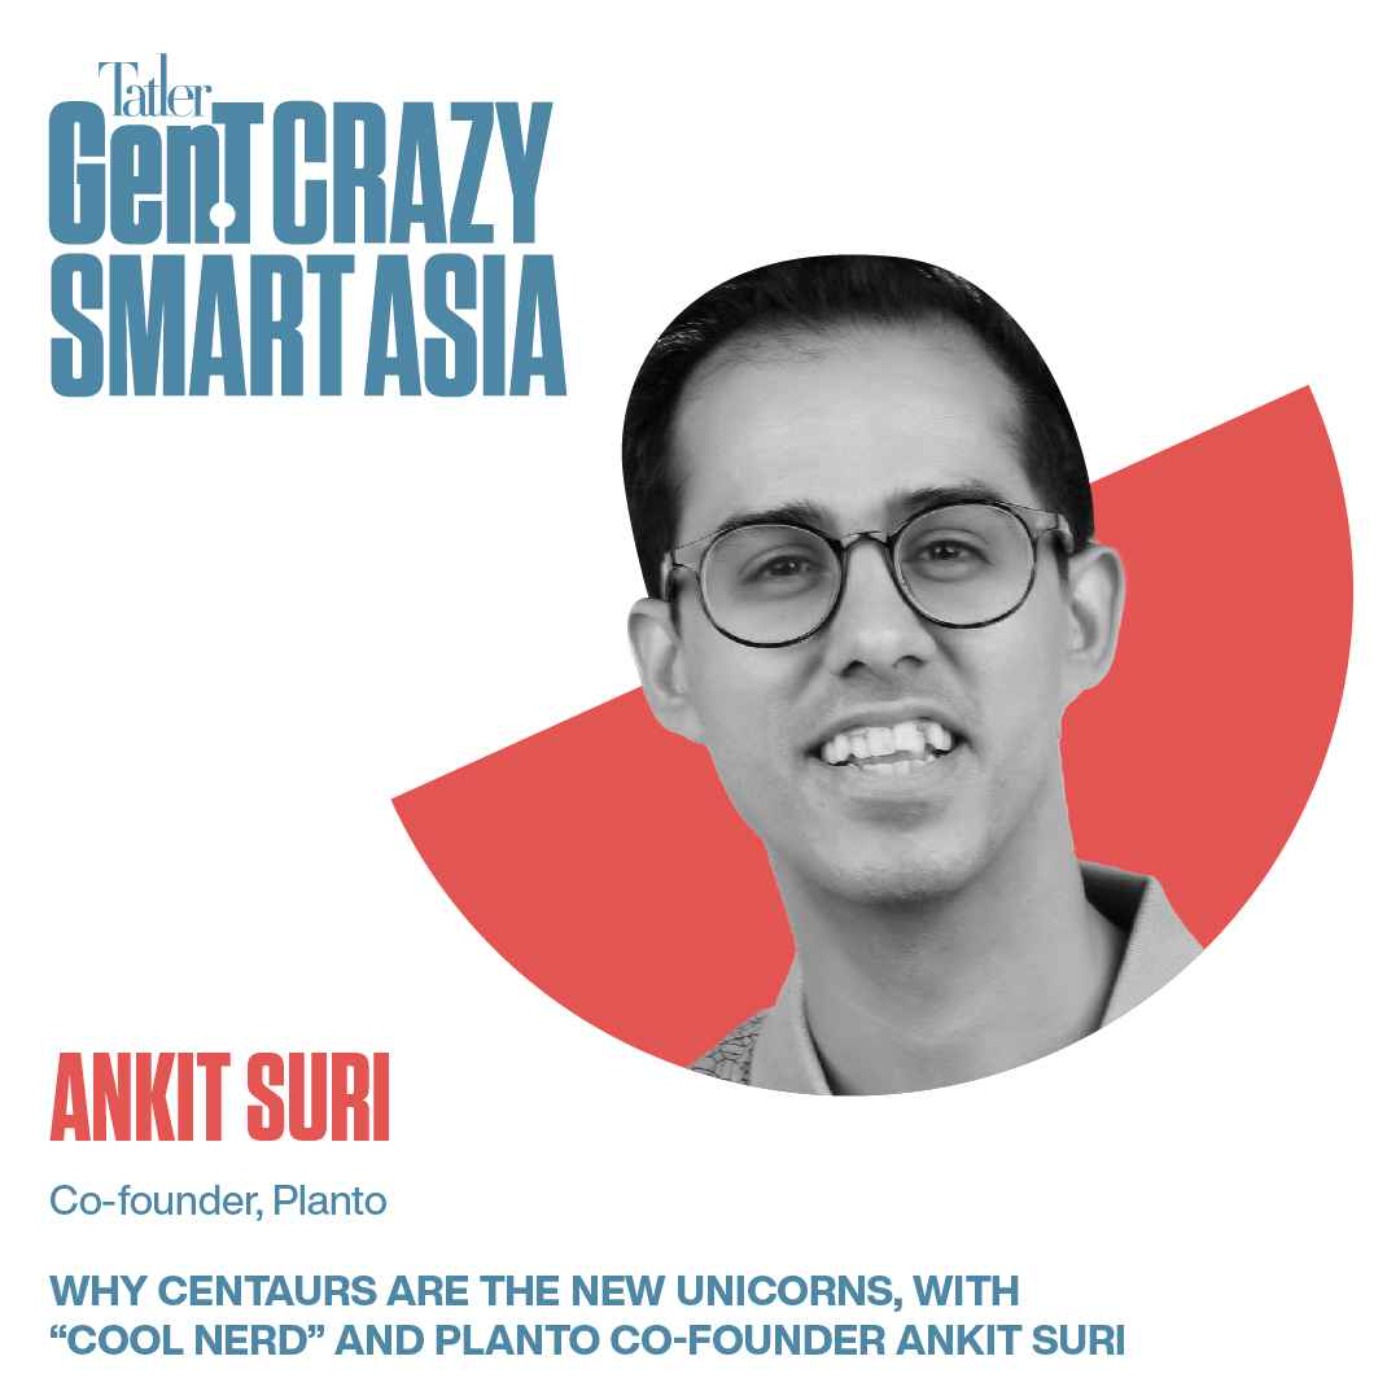 Why centaurs are the new unicorns, with “cool nerd” and Planto co-founder Ankit Suri